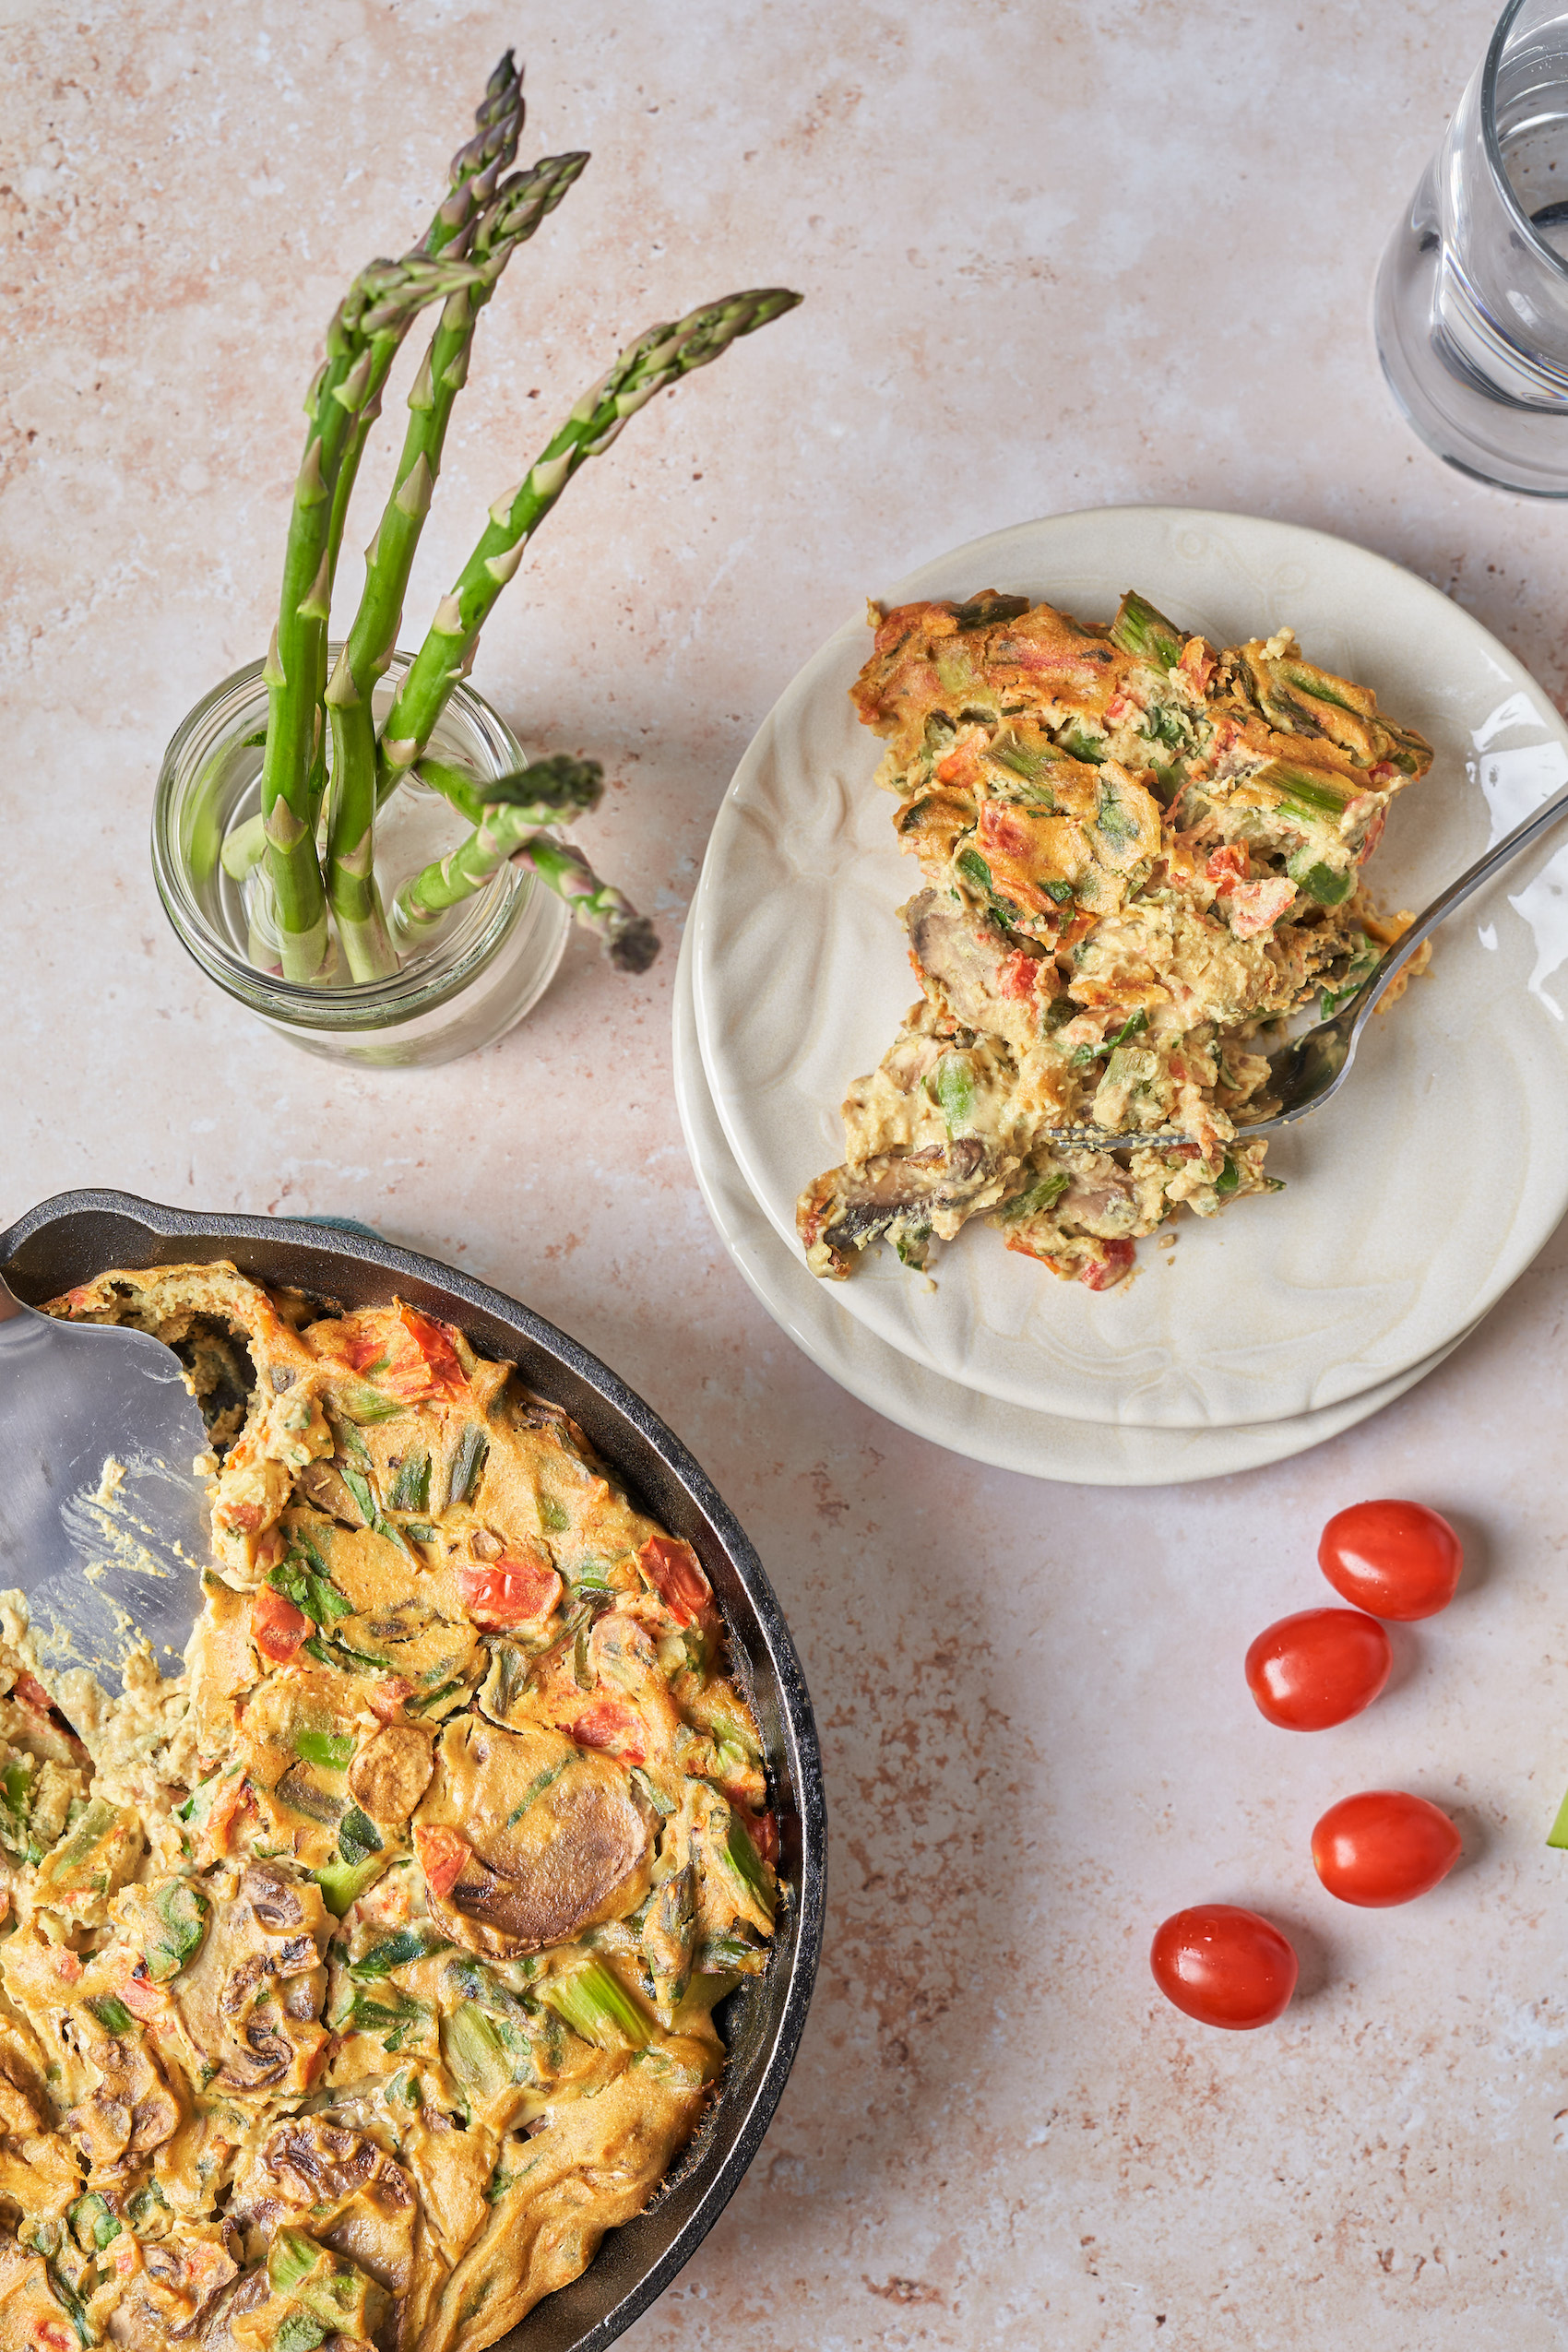 a slice of vegan quiche on a plate next to a cast iron skillet holding the rest of the quiche alongside a few cherry tomatoes and a glass jar of asparagus